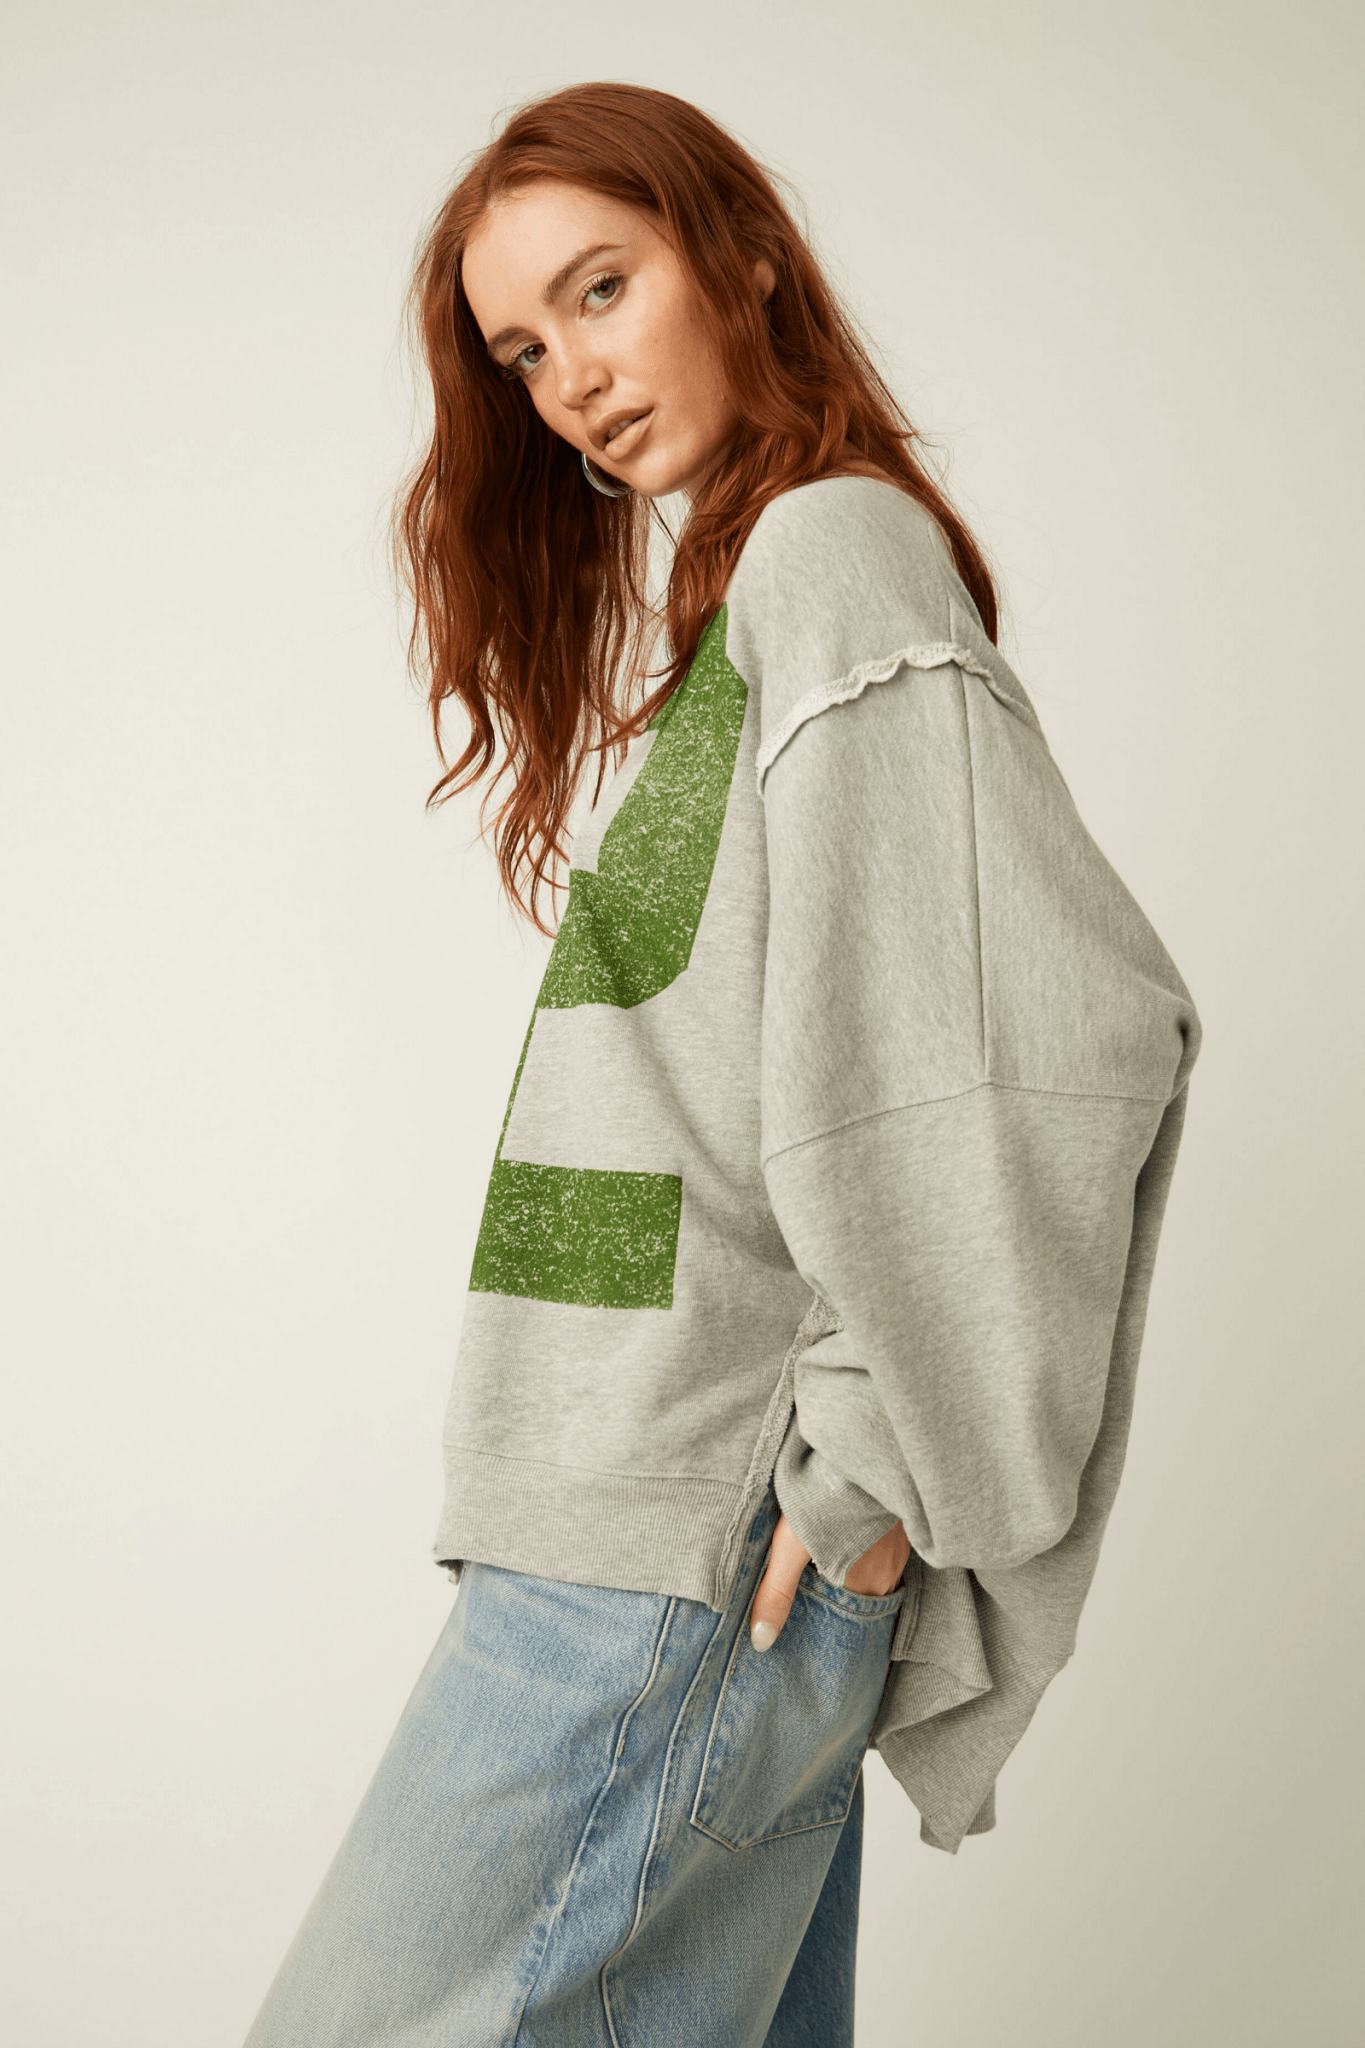 Graphic Camden pullover by Free People - Heather grey - Blue Sky Fashions & Lingerie